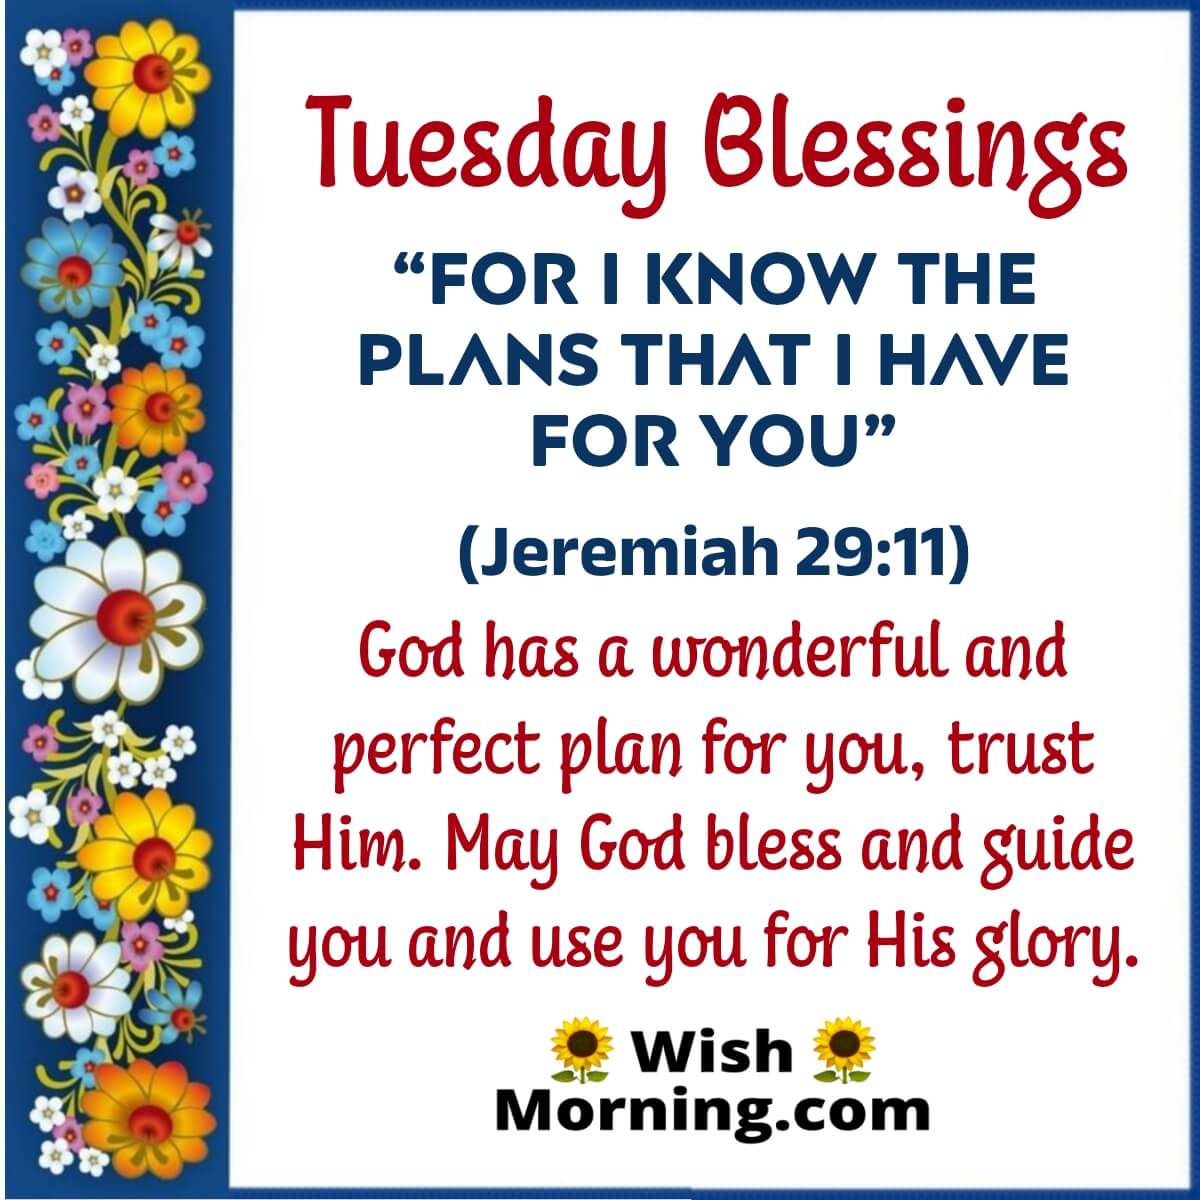 Tuesday Blessings Image